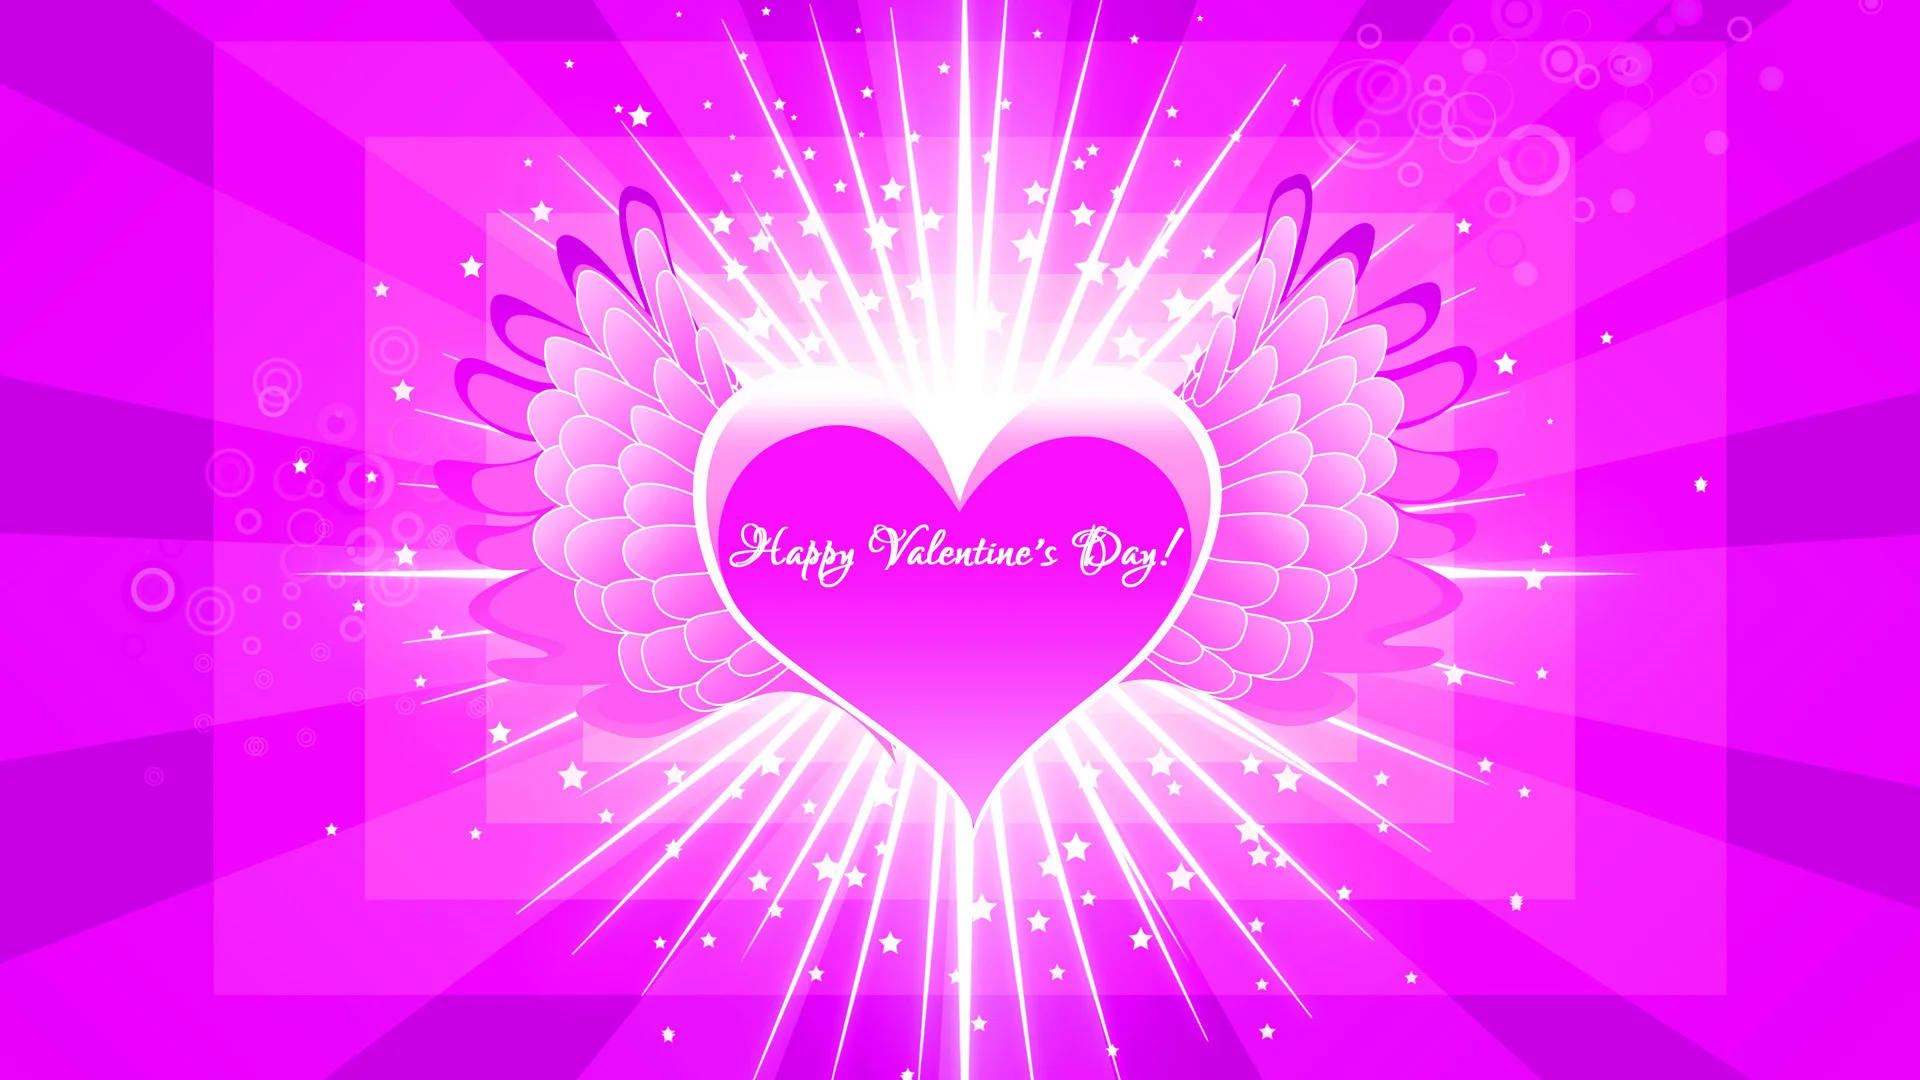 Valentine Day Images Pictures Wallpapers Free Download 1920Ã1080 Happy  valentines day wallpaper free (